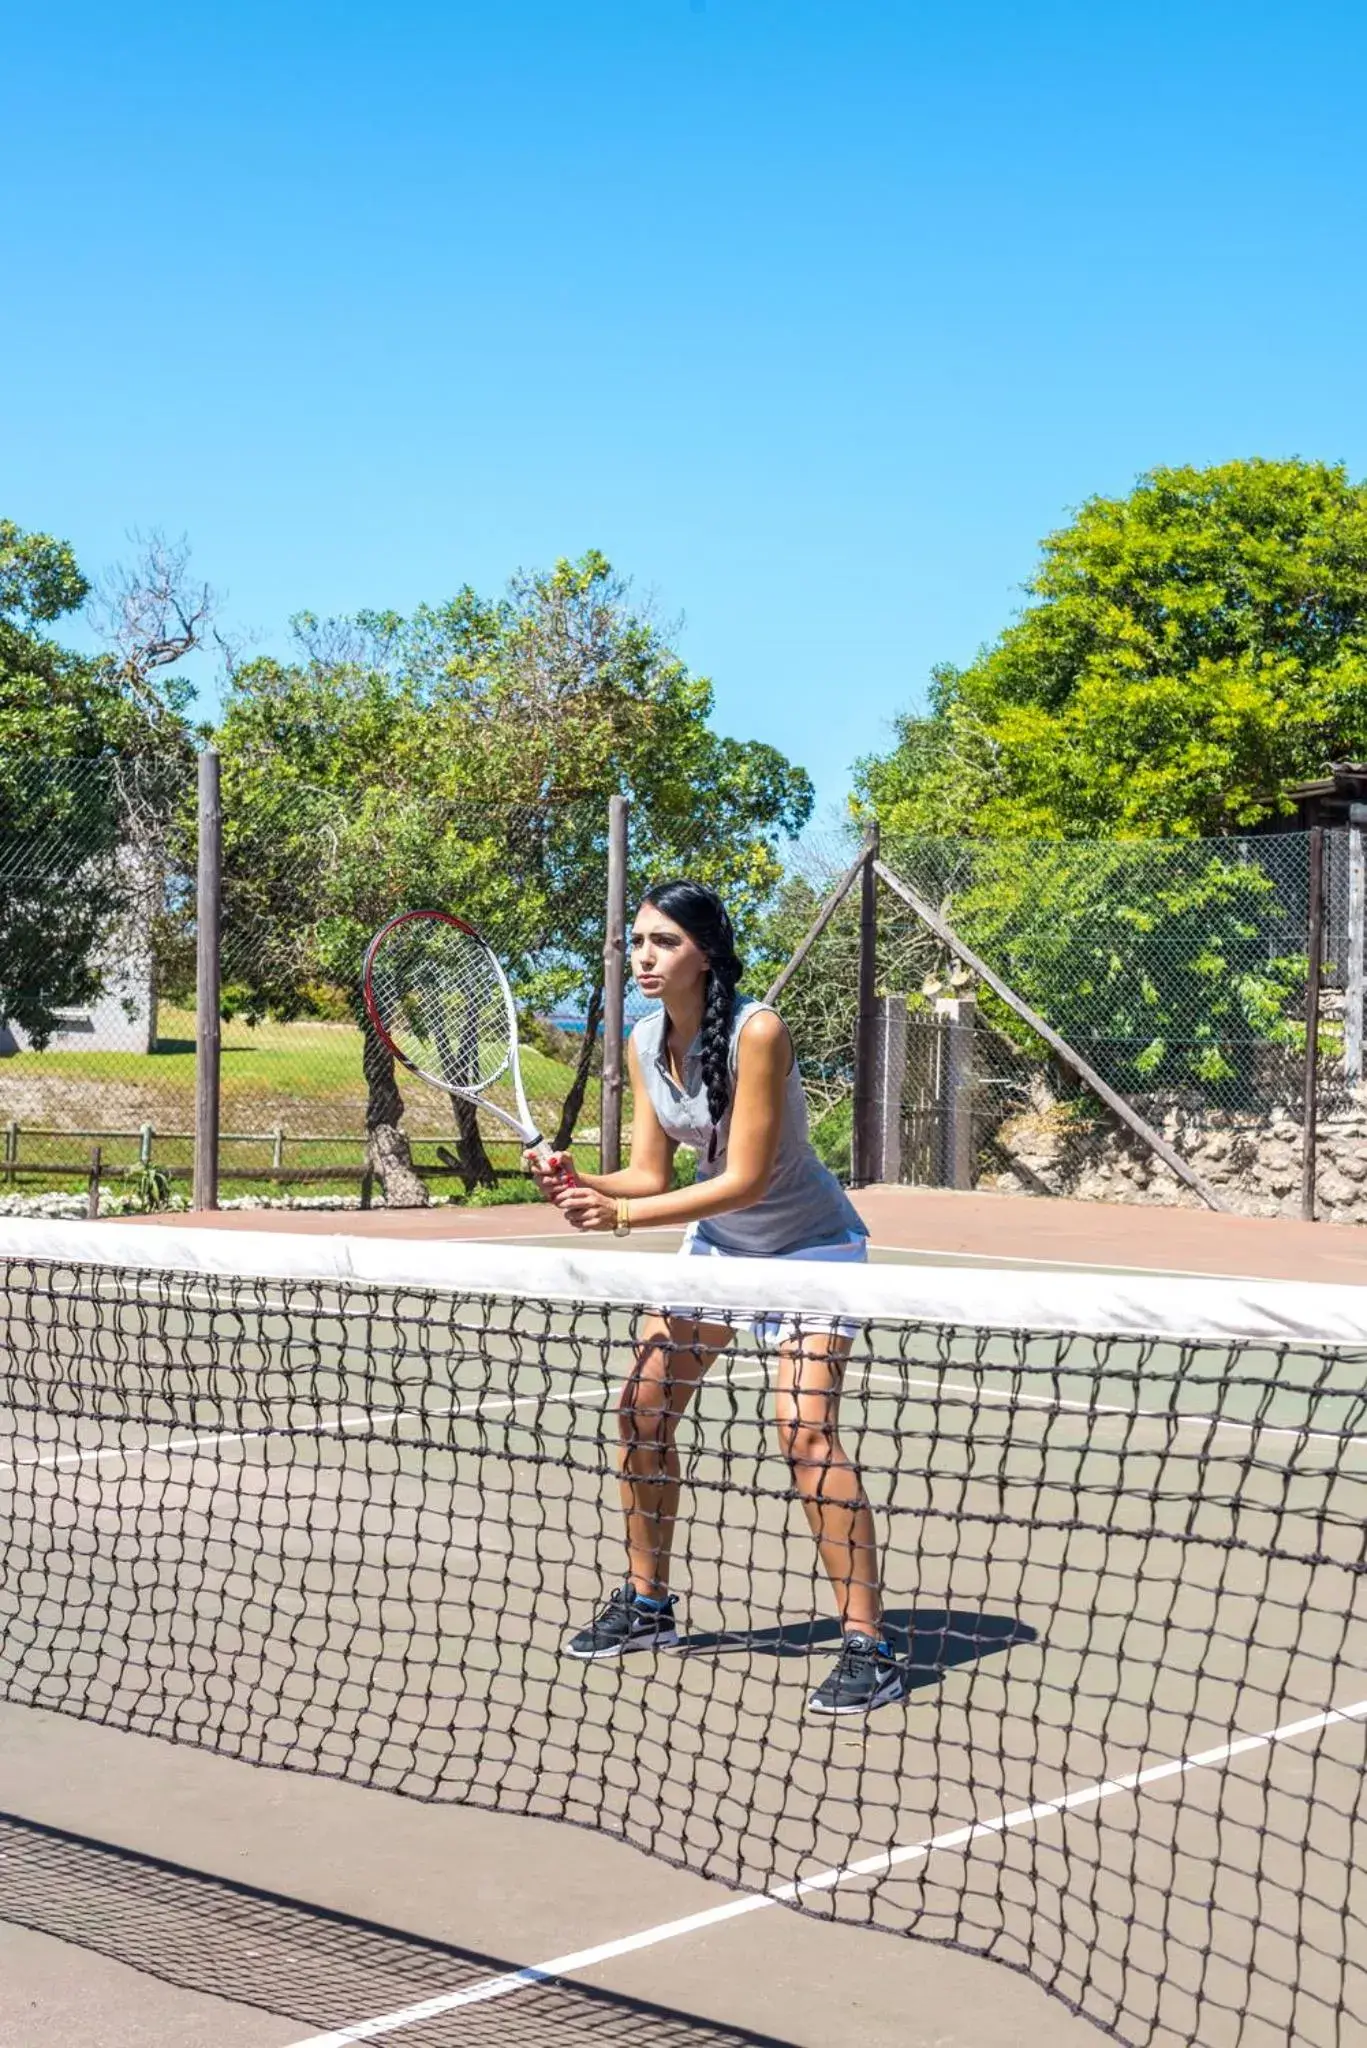 Tennis court in Blue Bay Lodge